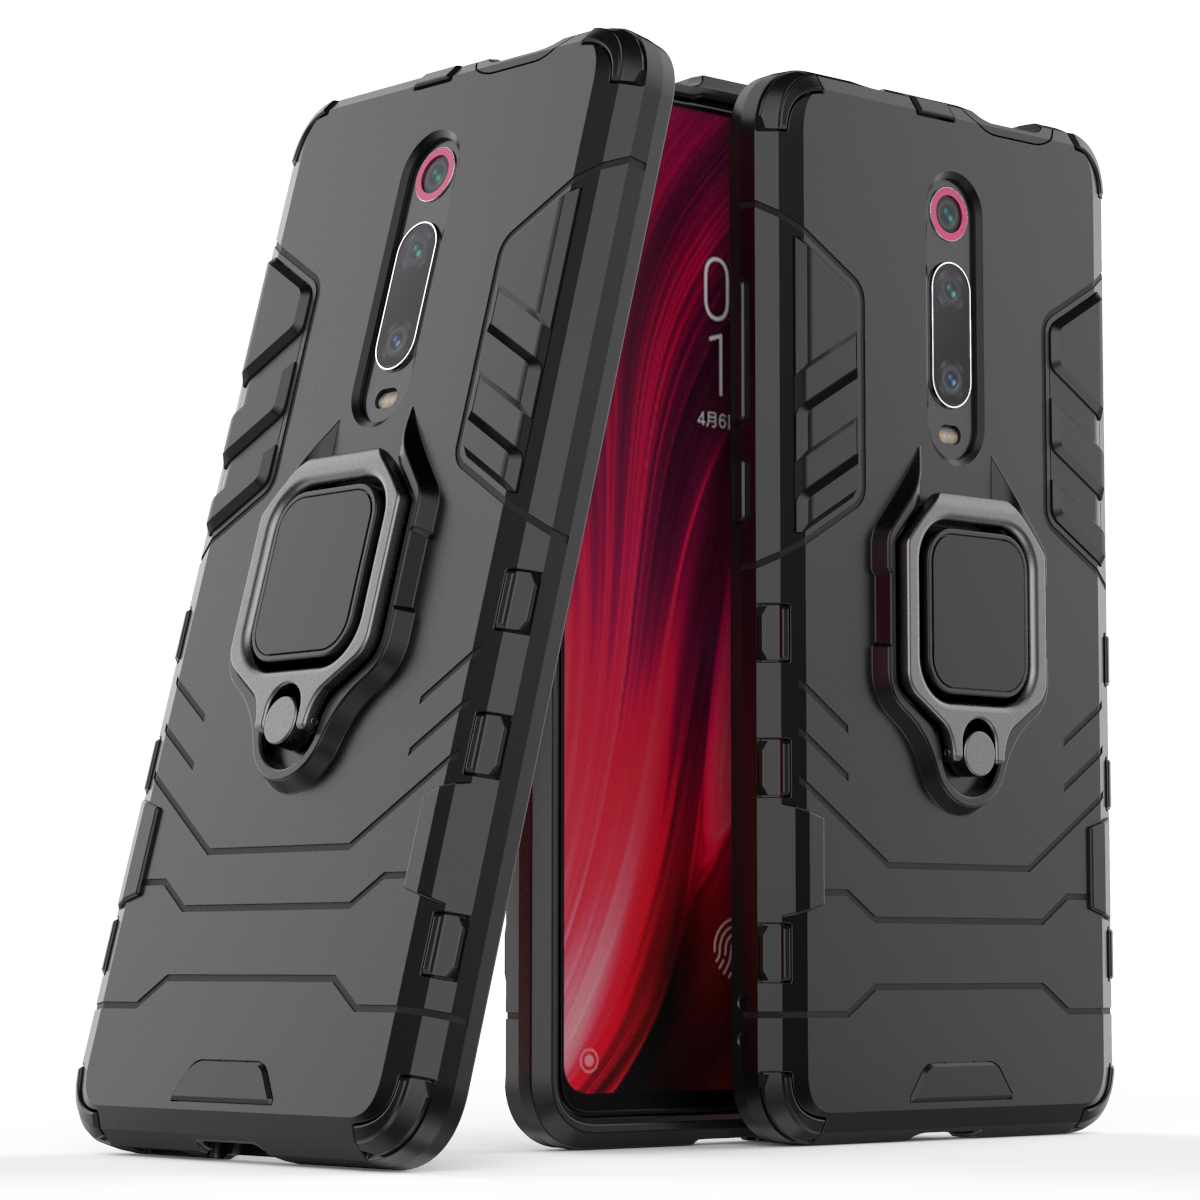 

Bakeey Armor Magnetic Card Holder Shockproof Protective Case For Xiaomi Mi 9T / Mi9T PRO / Redmi K20 / Redmi K20 pro